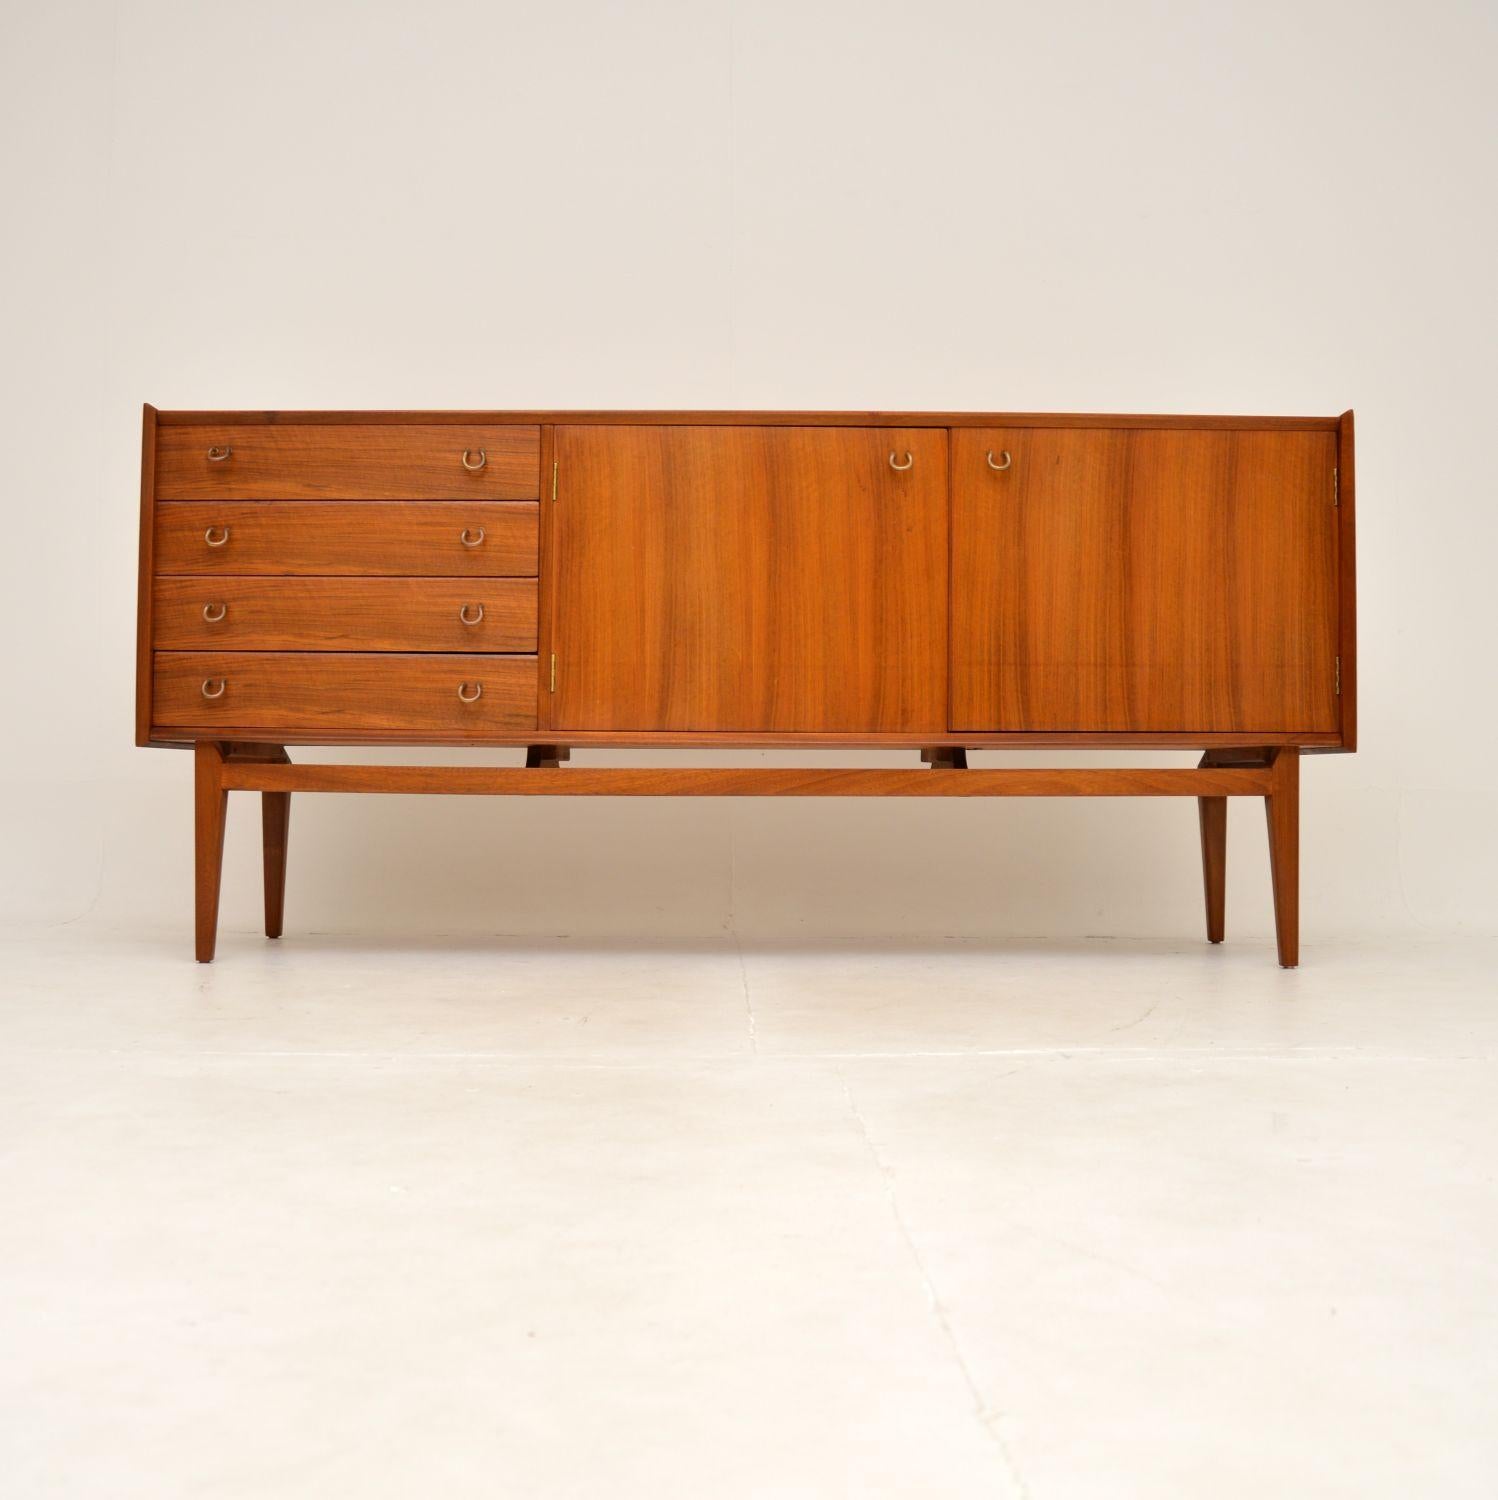 A very stylish and extremely well made vintage walnut sideboard by John Herbert for Younger. This was made in England, it dates from the 1950-60’s.

The quality is outstanding, this is beautifully designed and is a very useful size. It is low and